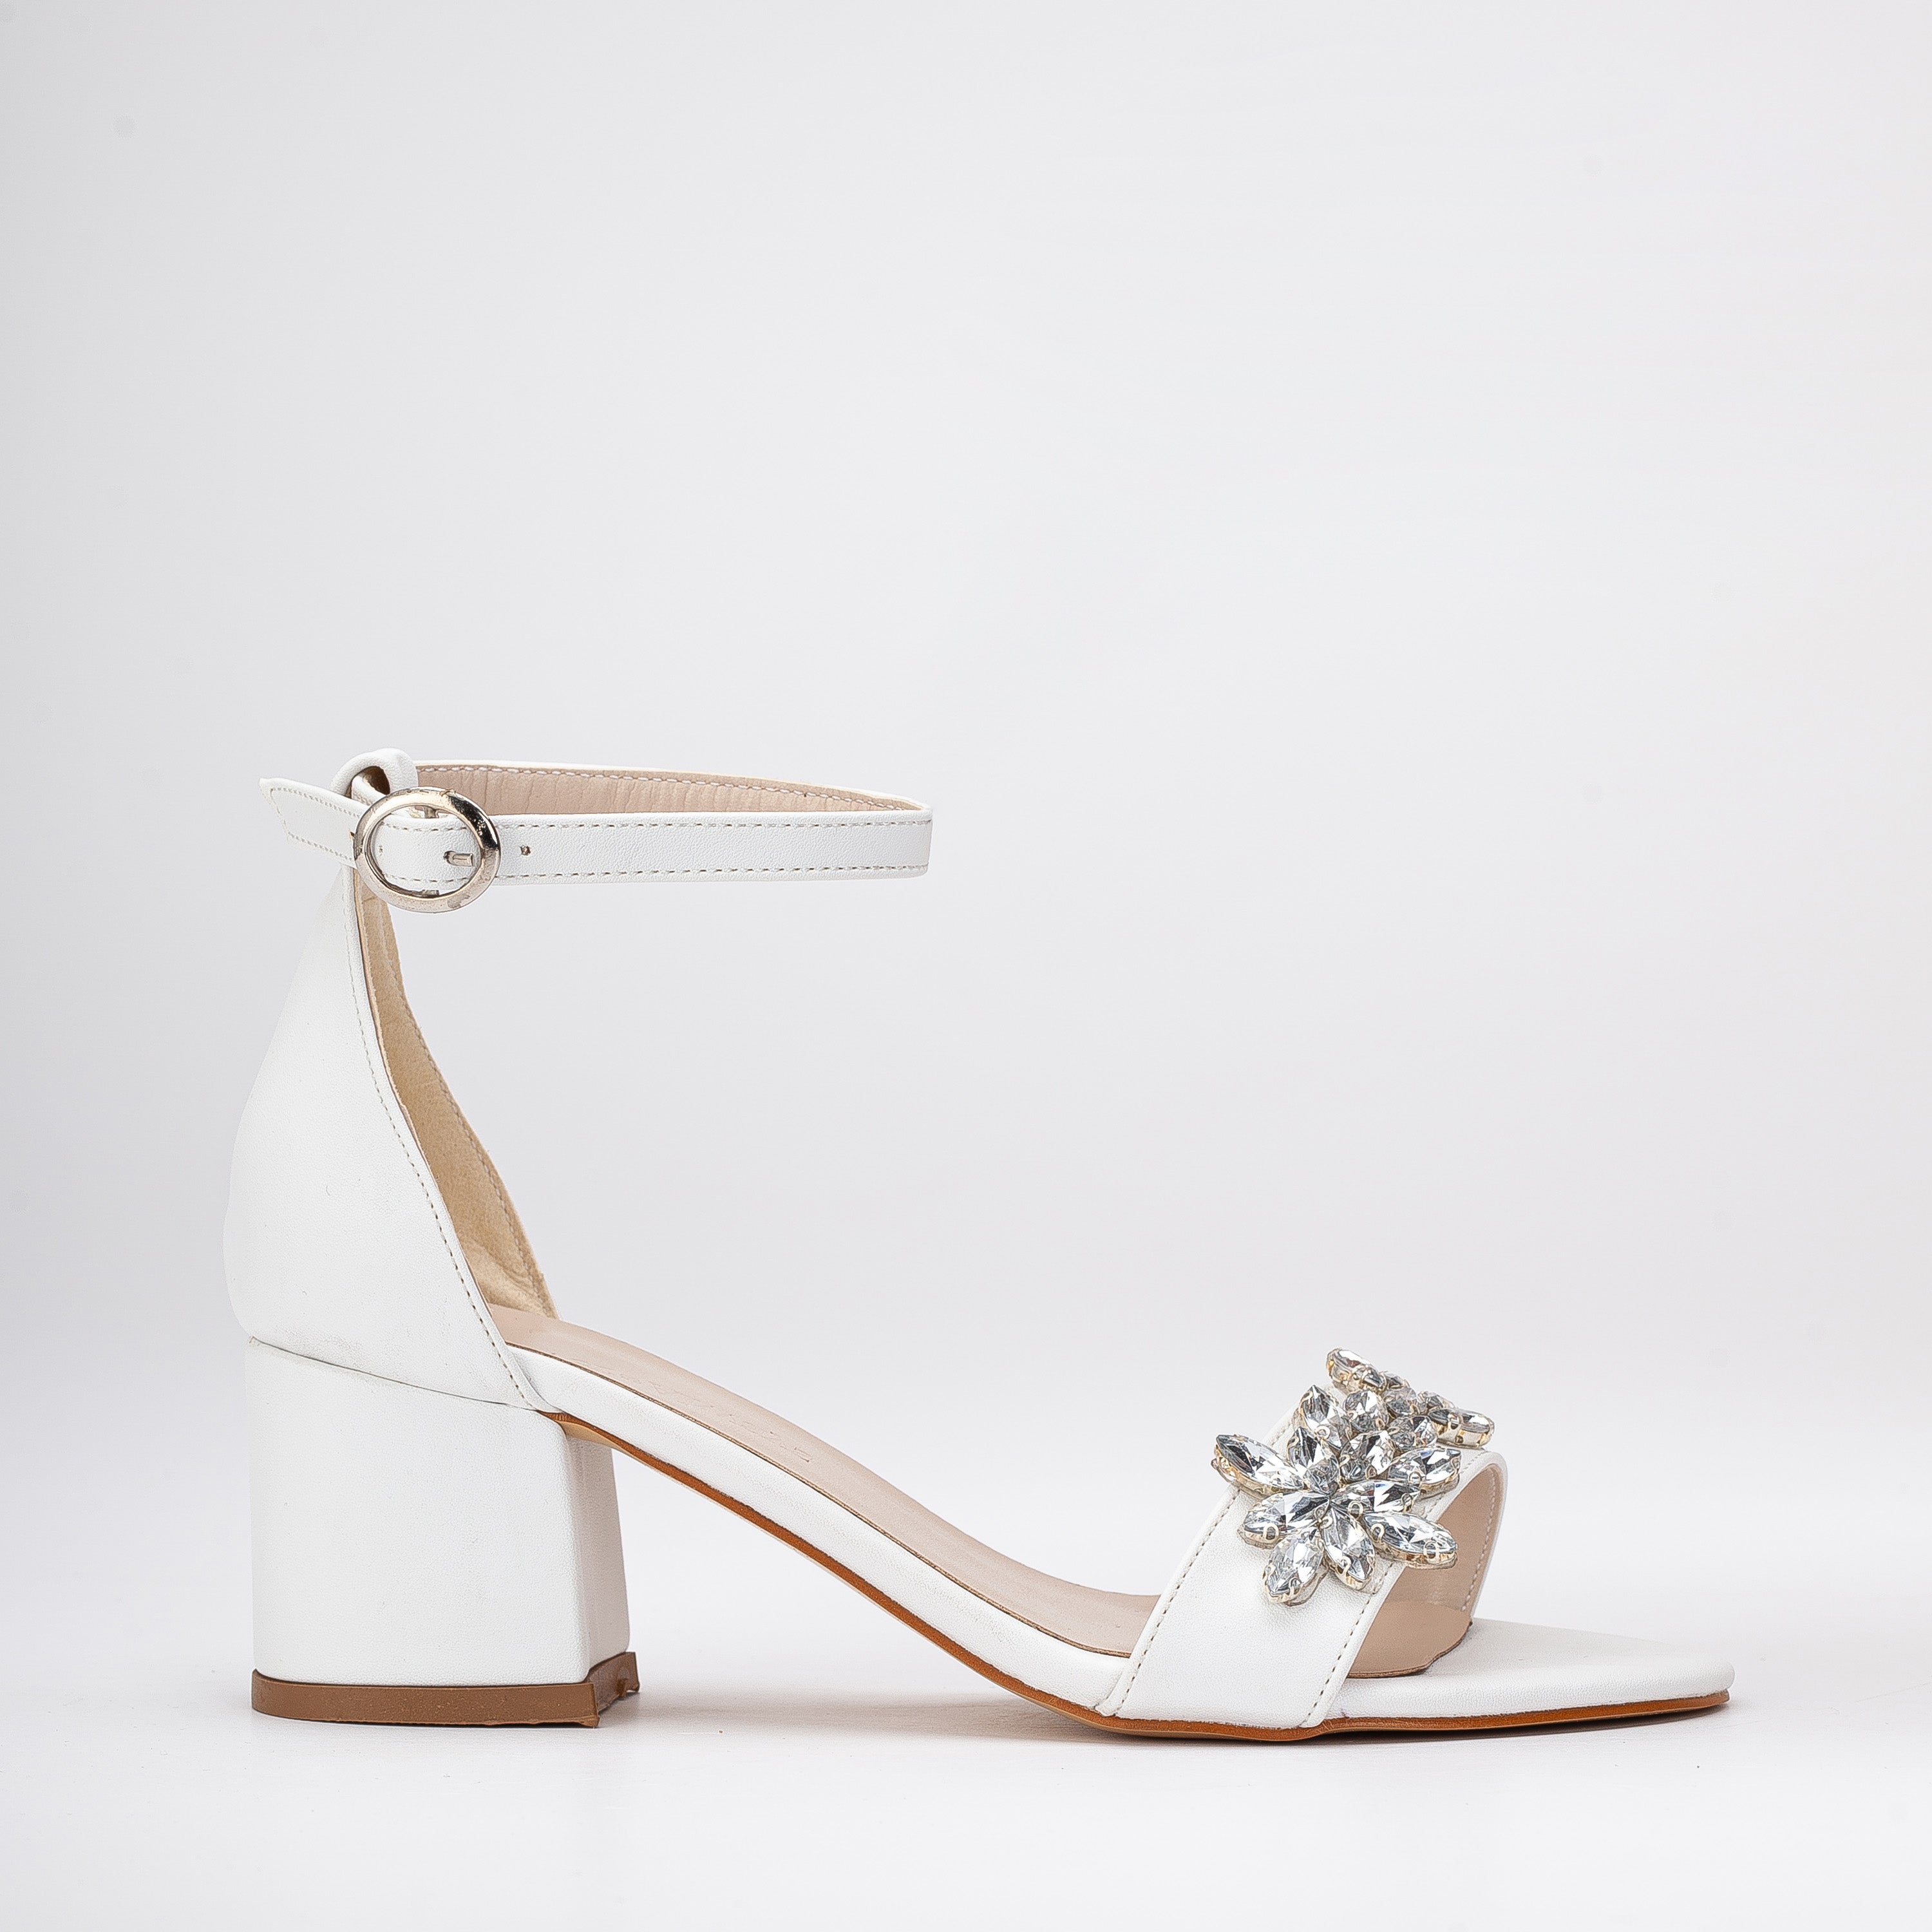 Peep Toe Embellished Ankle Strap Sandals D'orsay With Block Heels | Up2Step